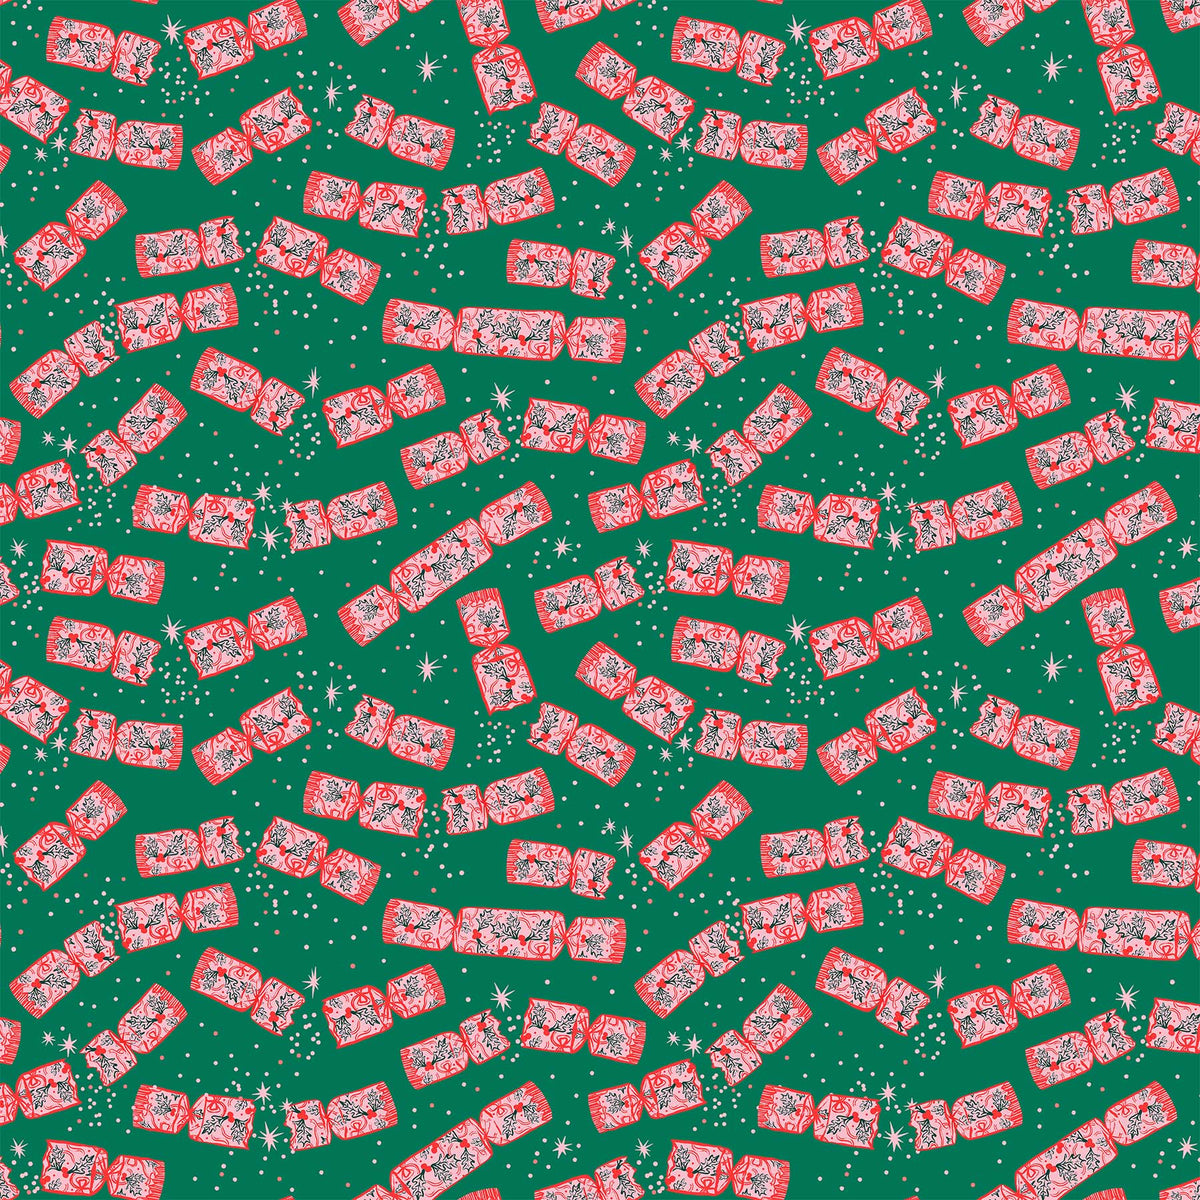 Merry Kitschmas Quilt Fabric - Christmas Crackers in Green - 90667-77 GREEN